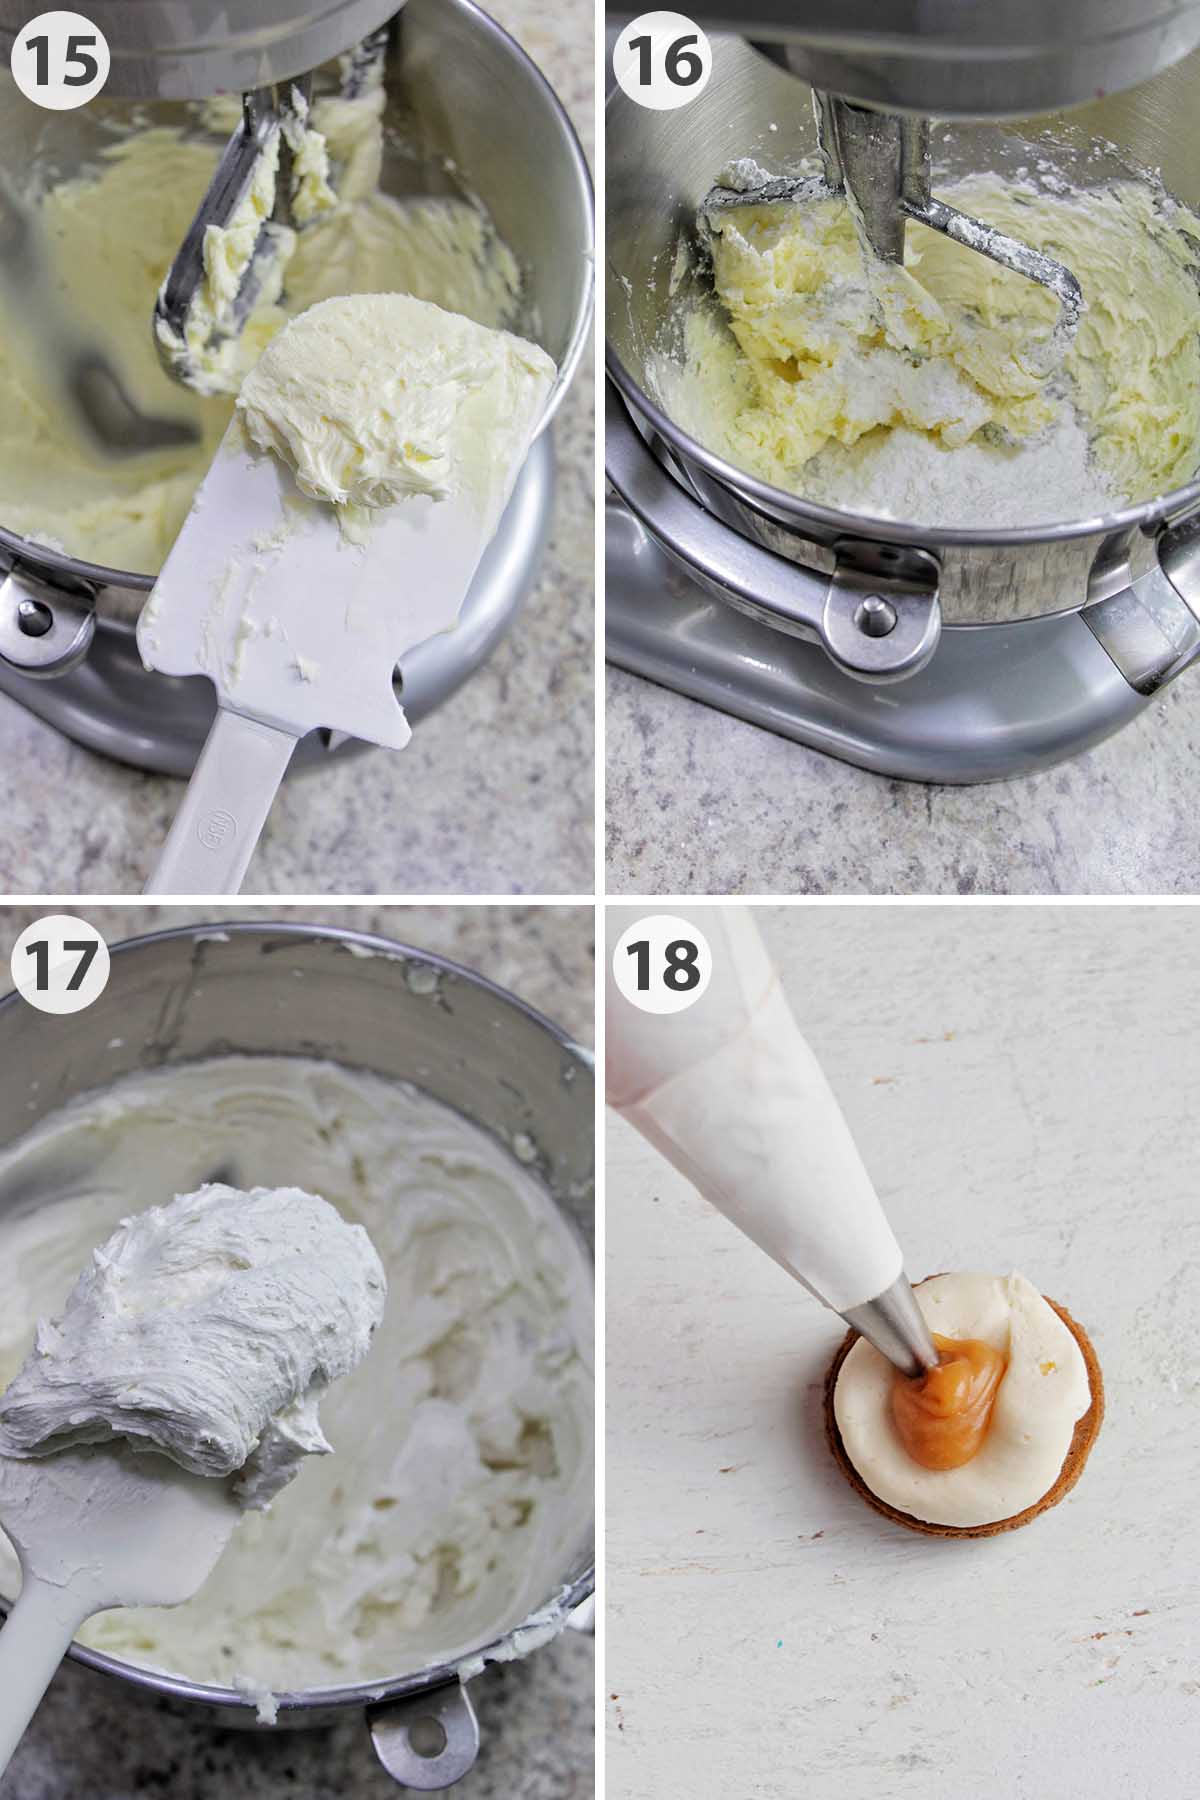 four numbered photos showing how to make buttercream filling and pipe macaron filling.